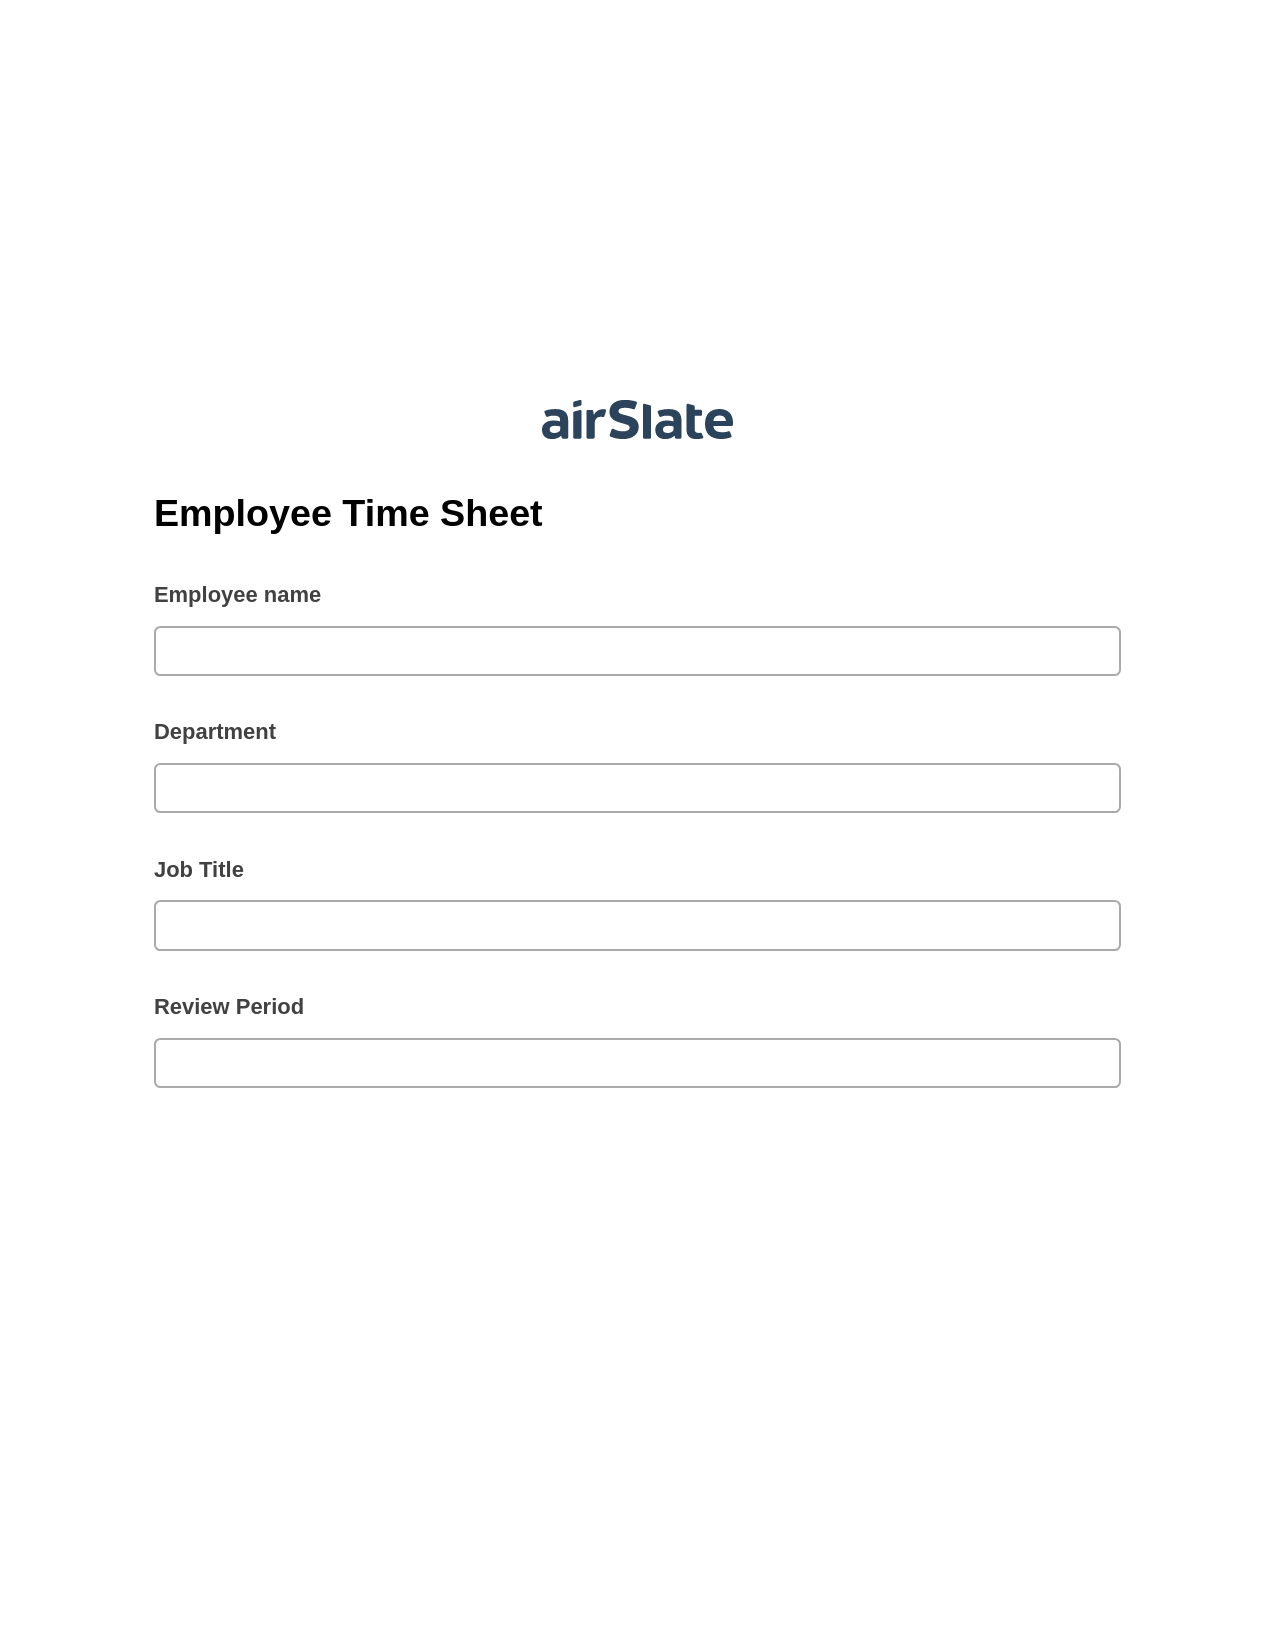 Employee Time Sheet Pre-fill from CSV File Bot, Create Salesforce Records Bot, Archive to Dropbox Bot